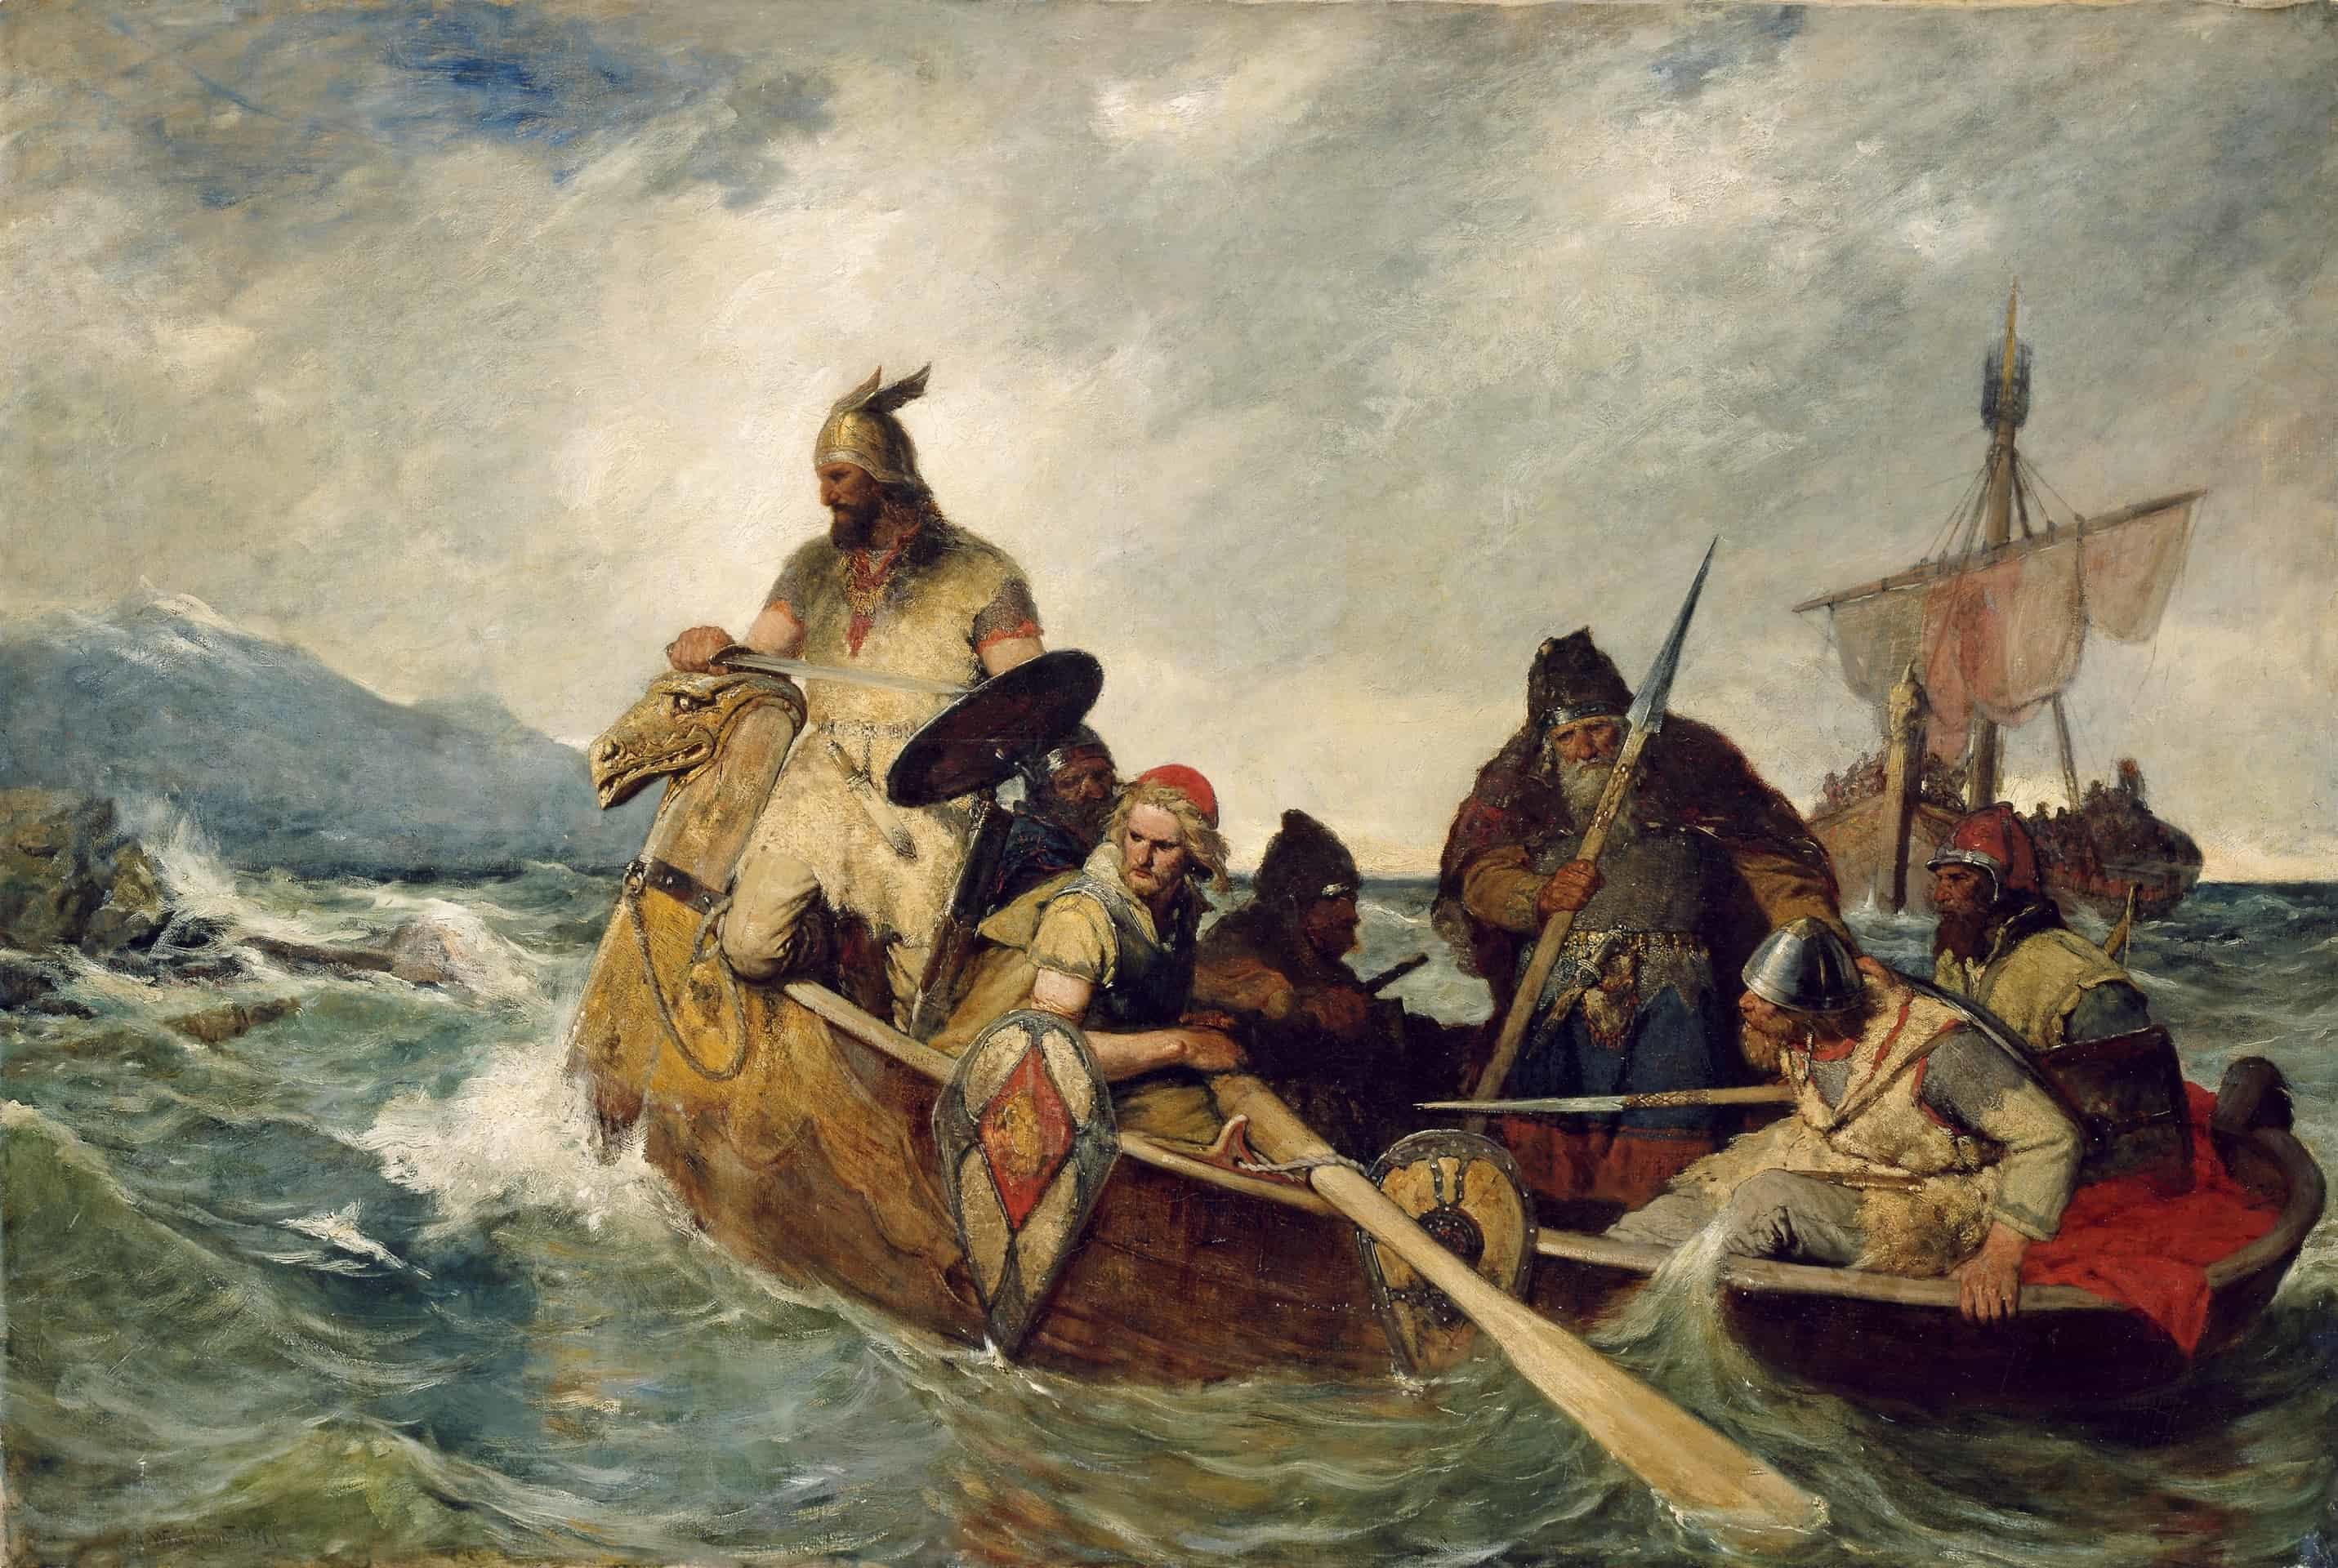 A depiction of the Norwegians landing in Iceland